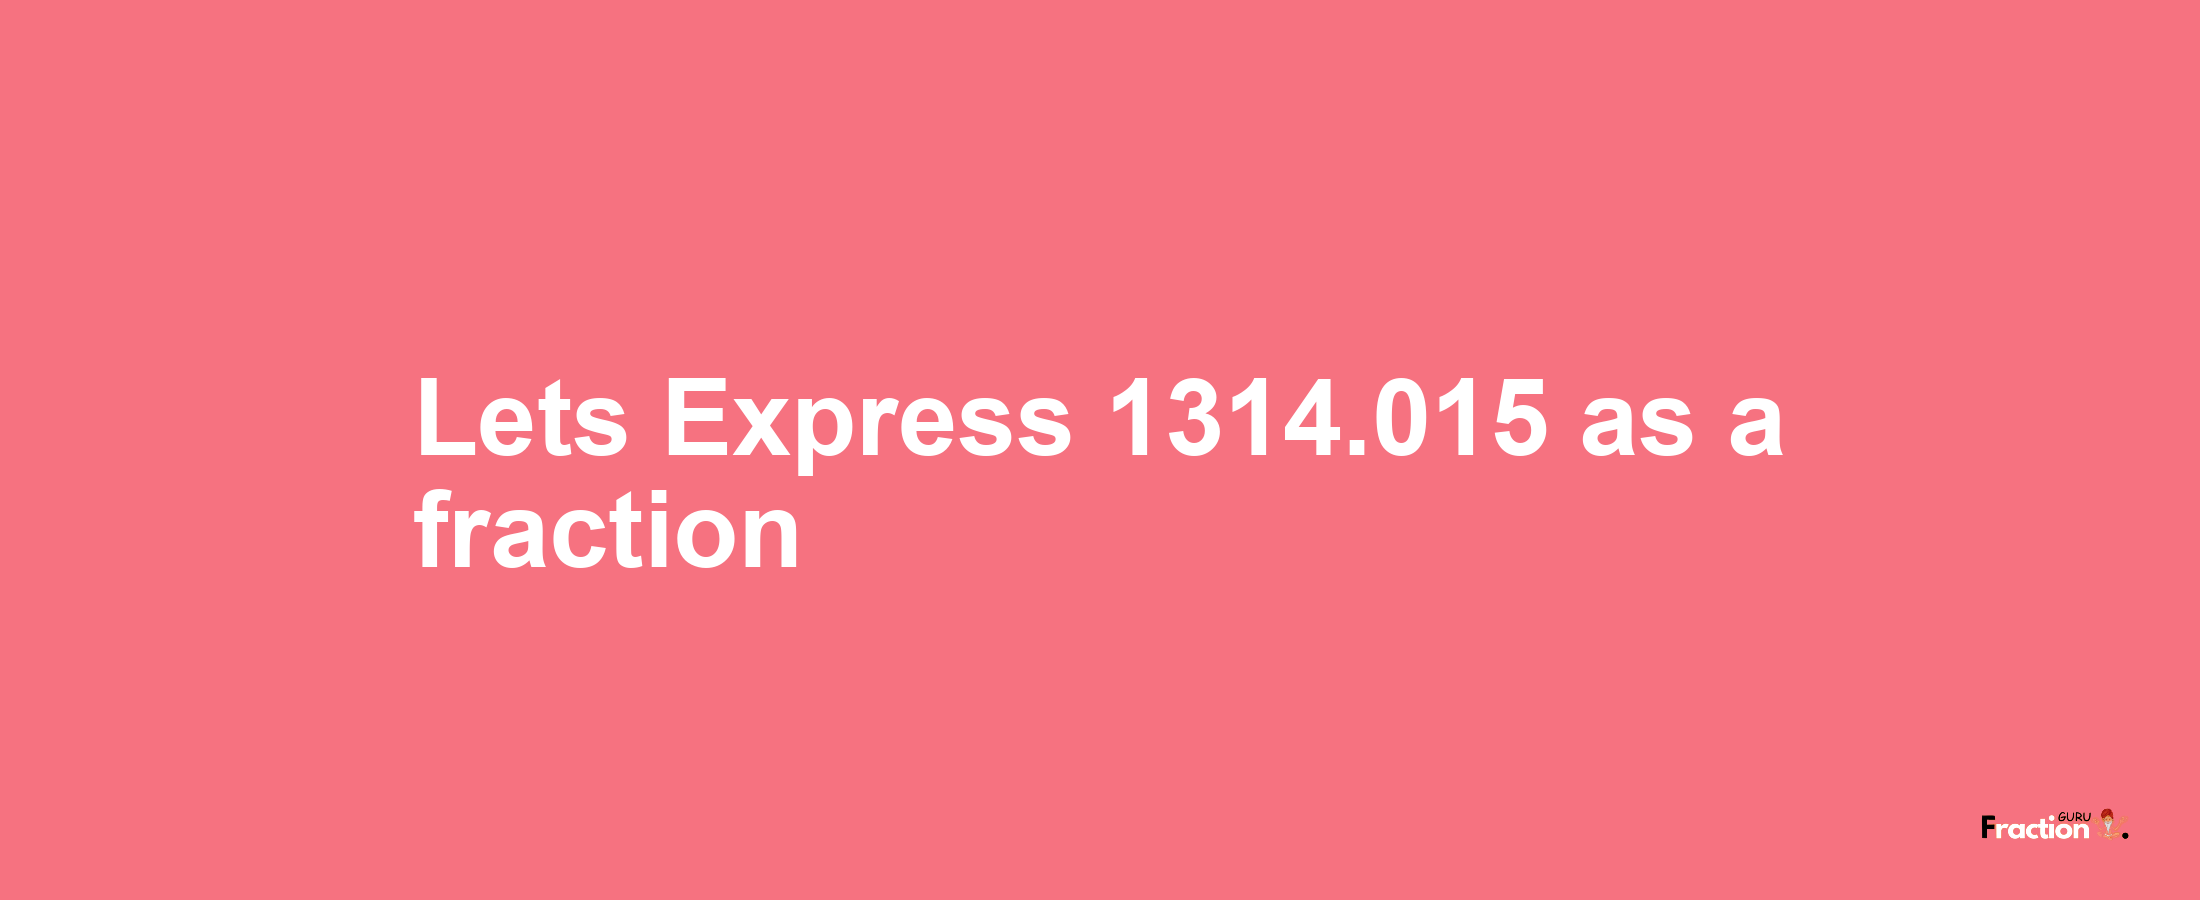 Lets Express 1314.015 as afraction